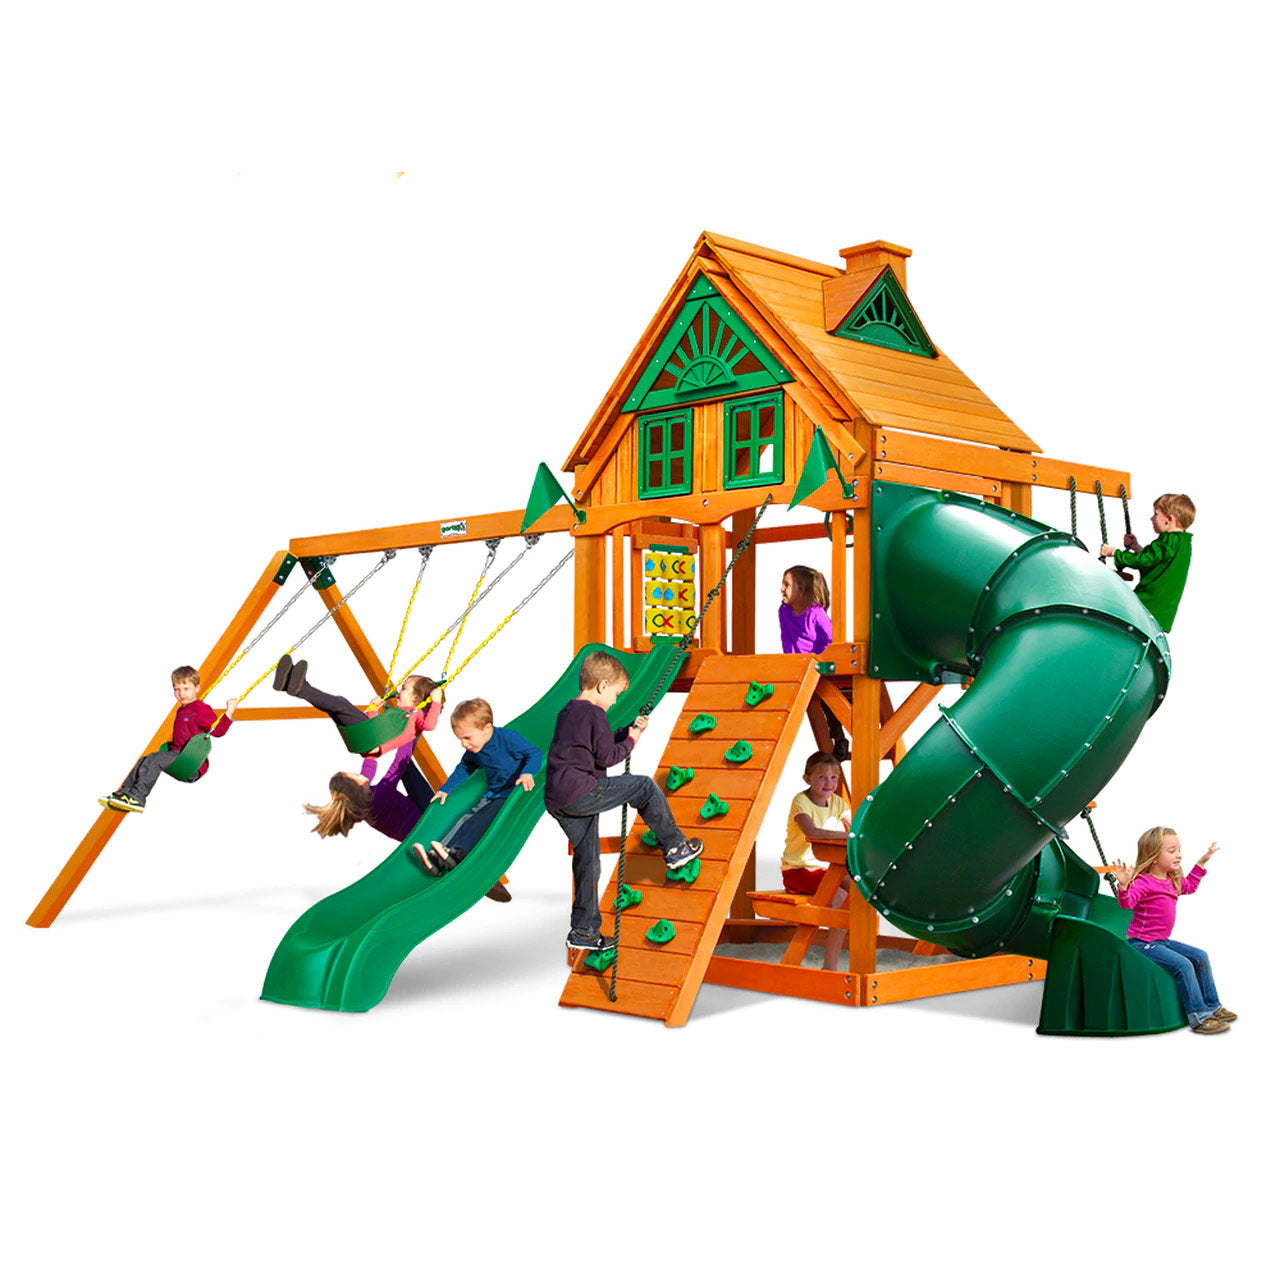 Mountaineer AP Wooden Swing Set | WillyGoat Playground & Park Equipment